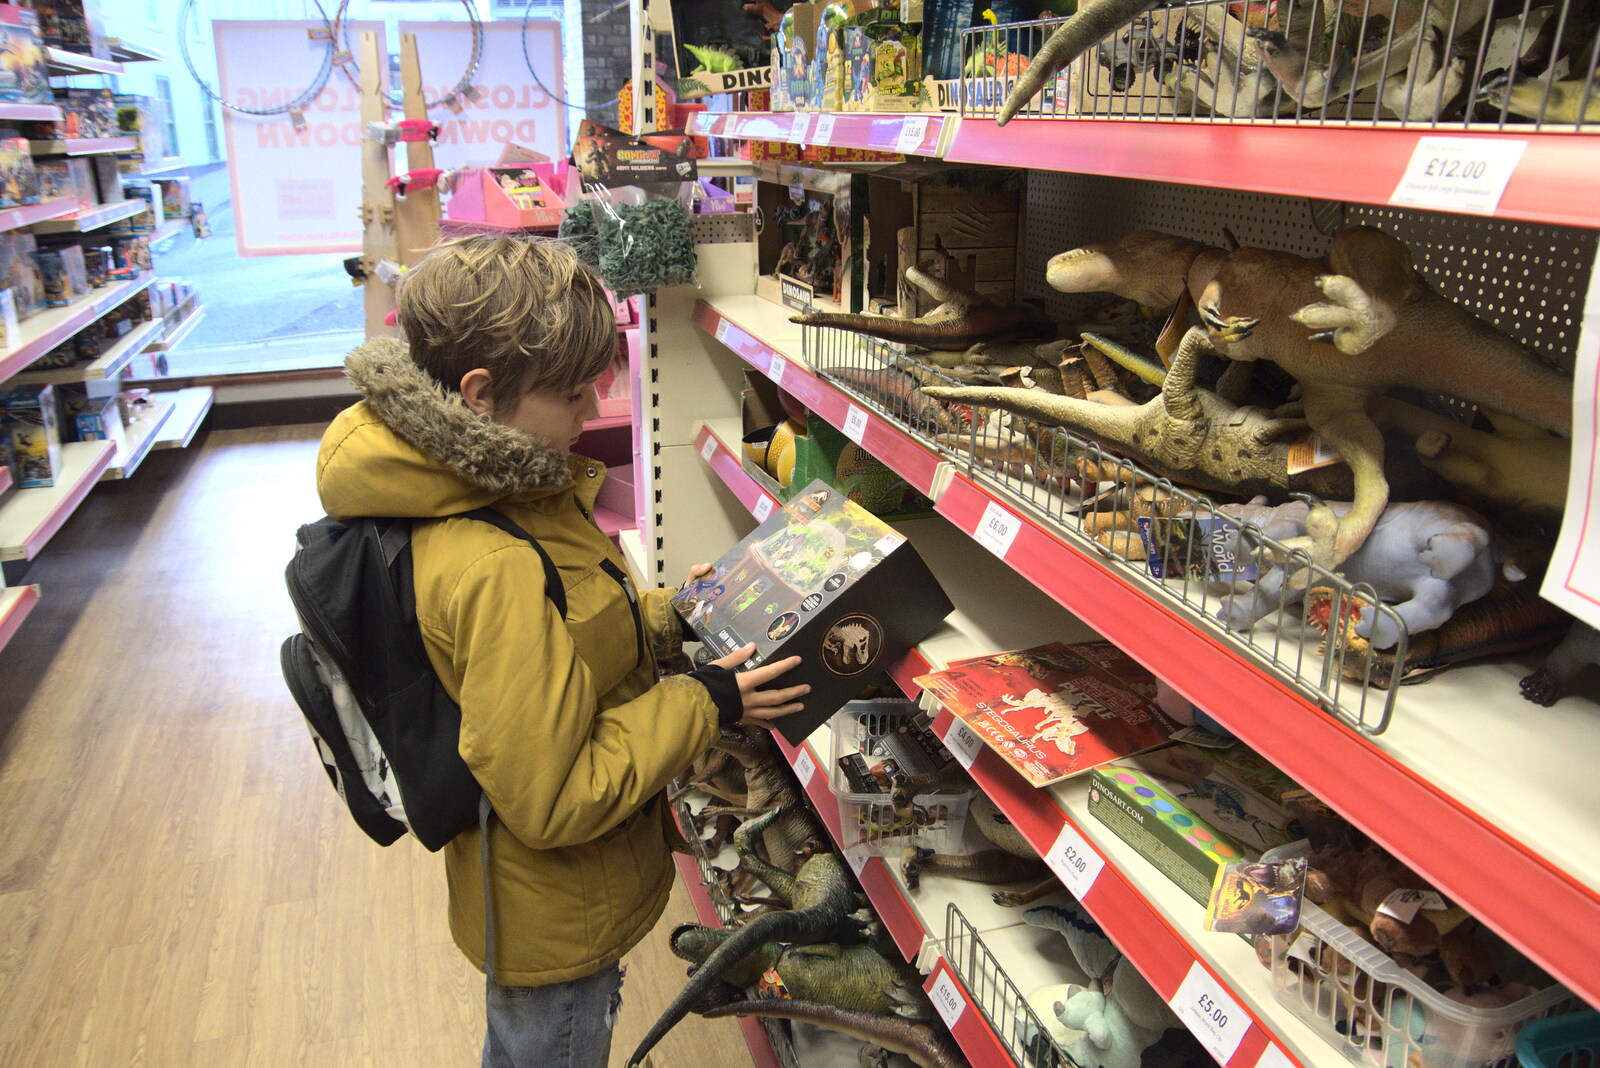 Pizza and Pasta in Bury St. Edmunds, Suffolk - 30th October 2022: Harry checks out bargains in the Toymaster sale